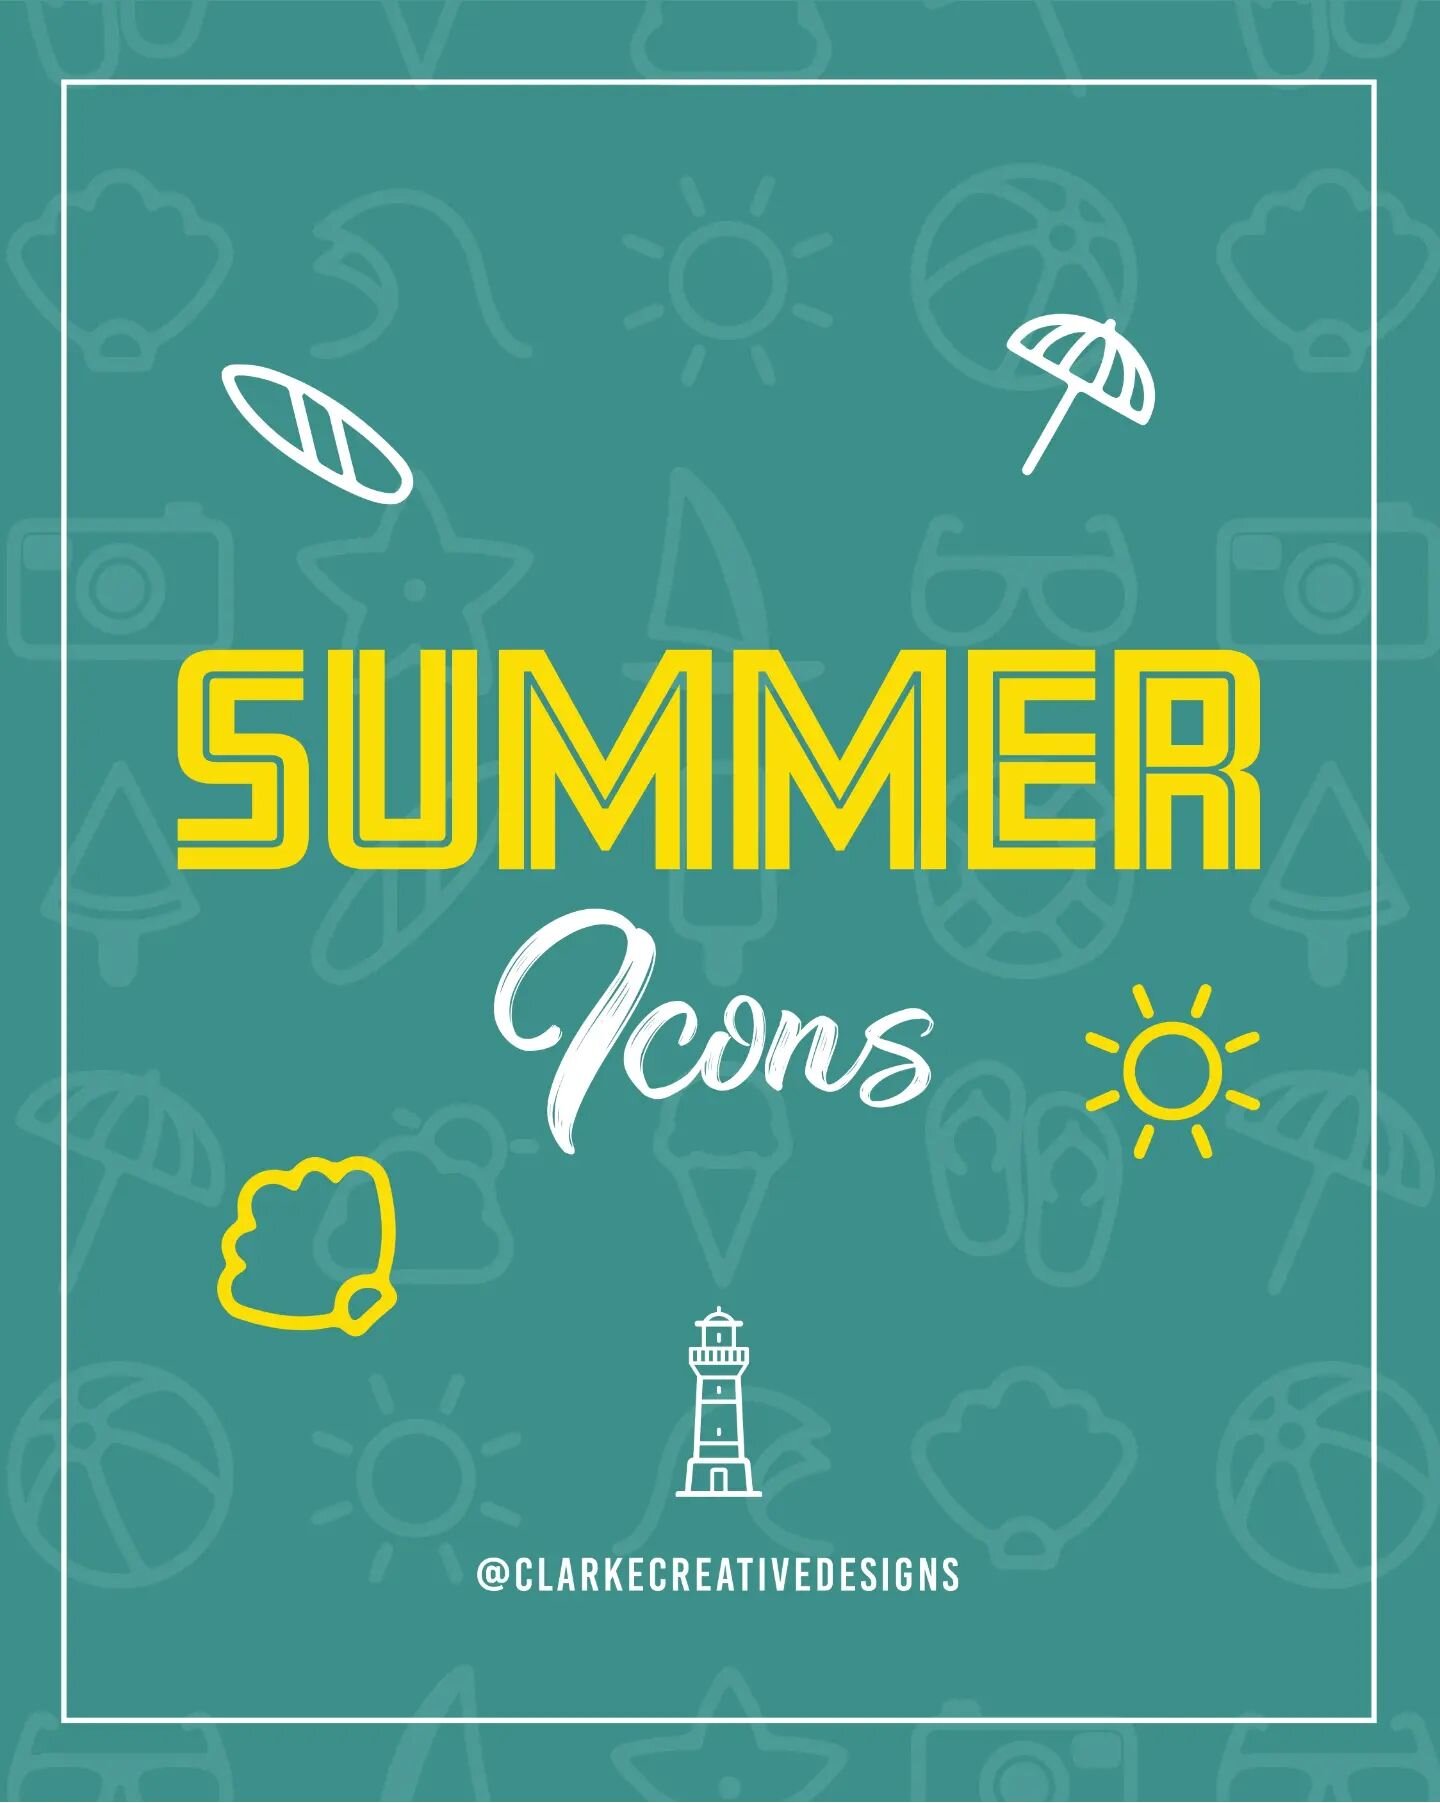 IT'S SUMMER TIME BABY! ☀️

With summer right around the corner. There is not much more on this earth that makes me more happy than a nice hot summer in Australia. 🤩

These summer icons are exactly what my brain thinks about when I think of summer! A